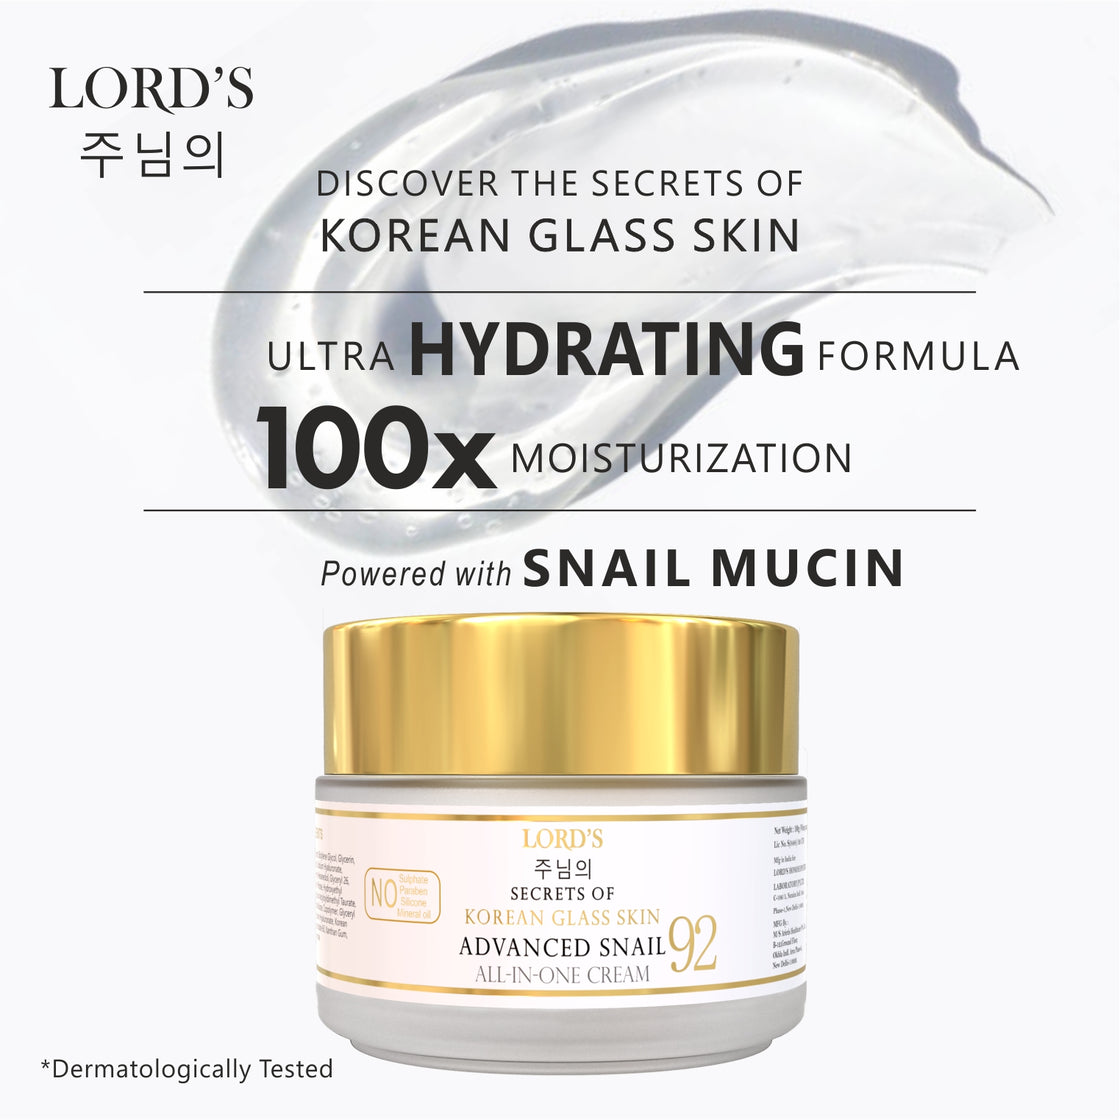 Lord's Advanced Snail 92 All-in-One Cream (100gm)